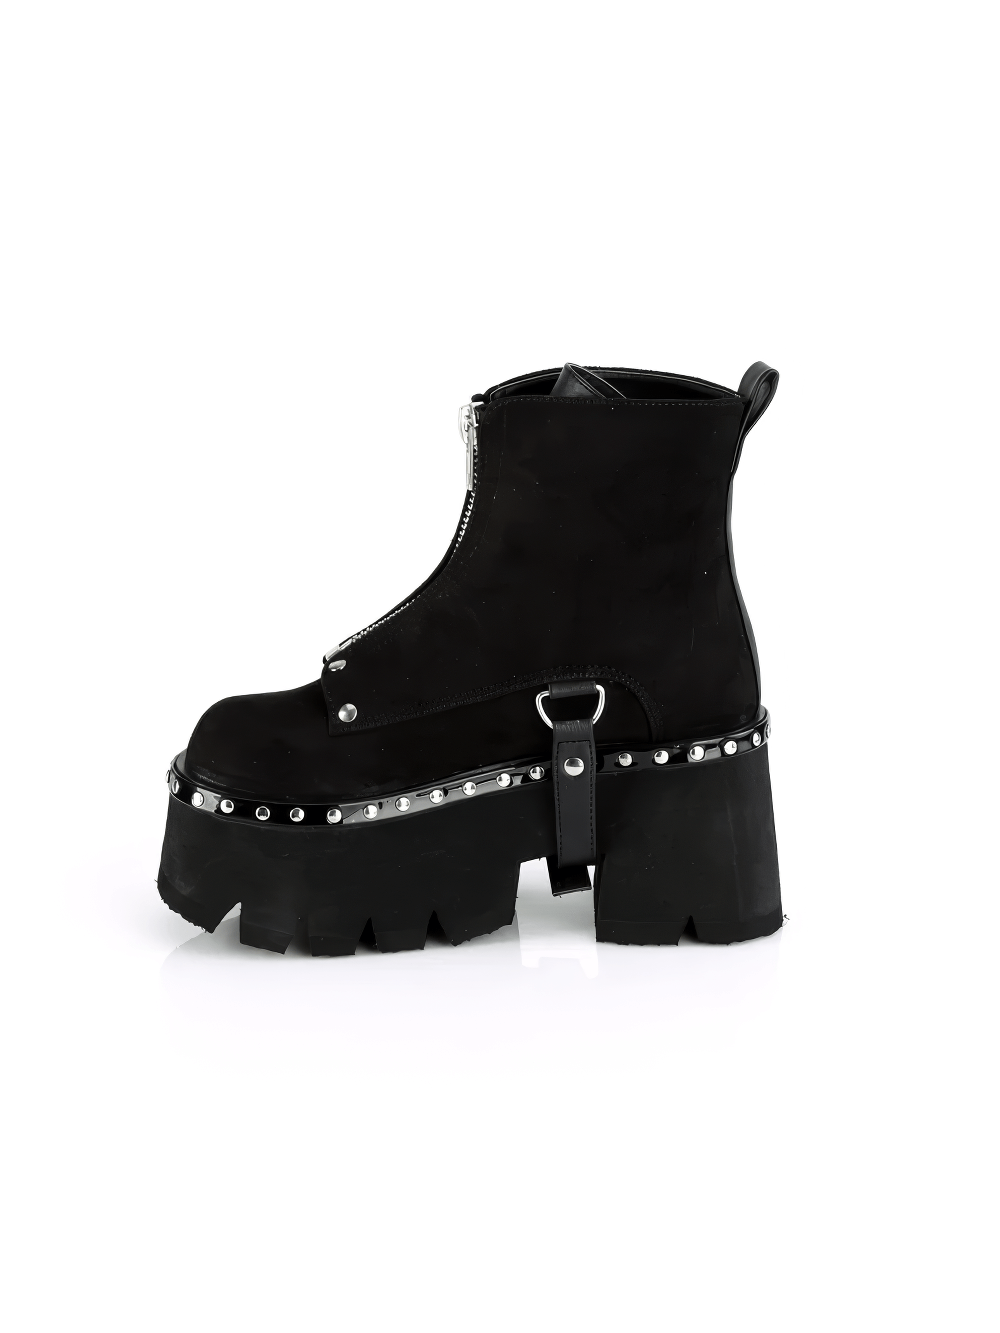 DEMONIA Black Platform Ankle Boots with Harness Strap